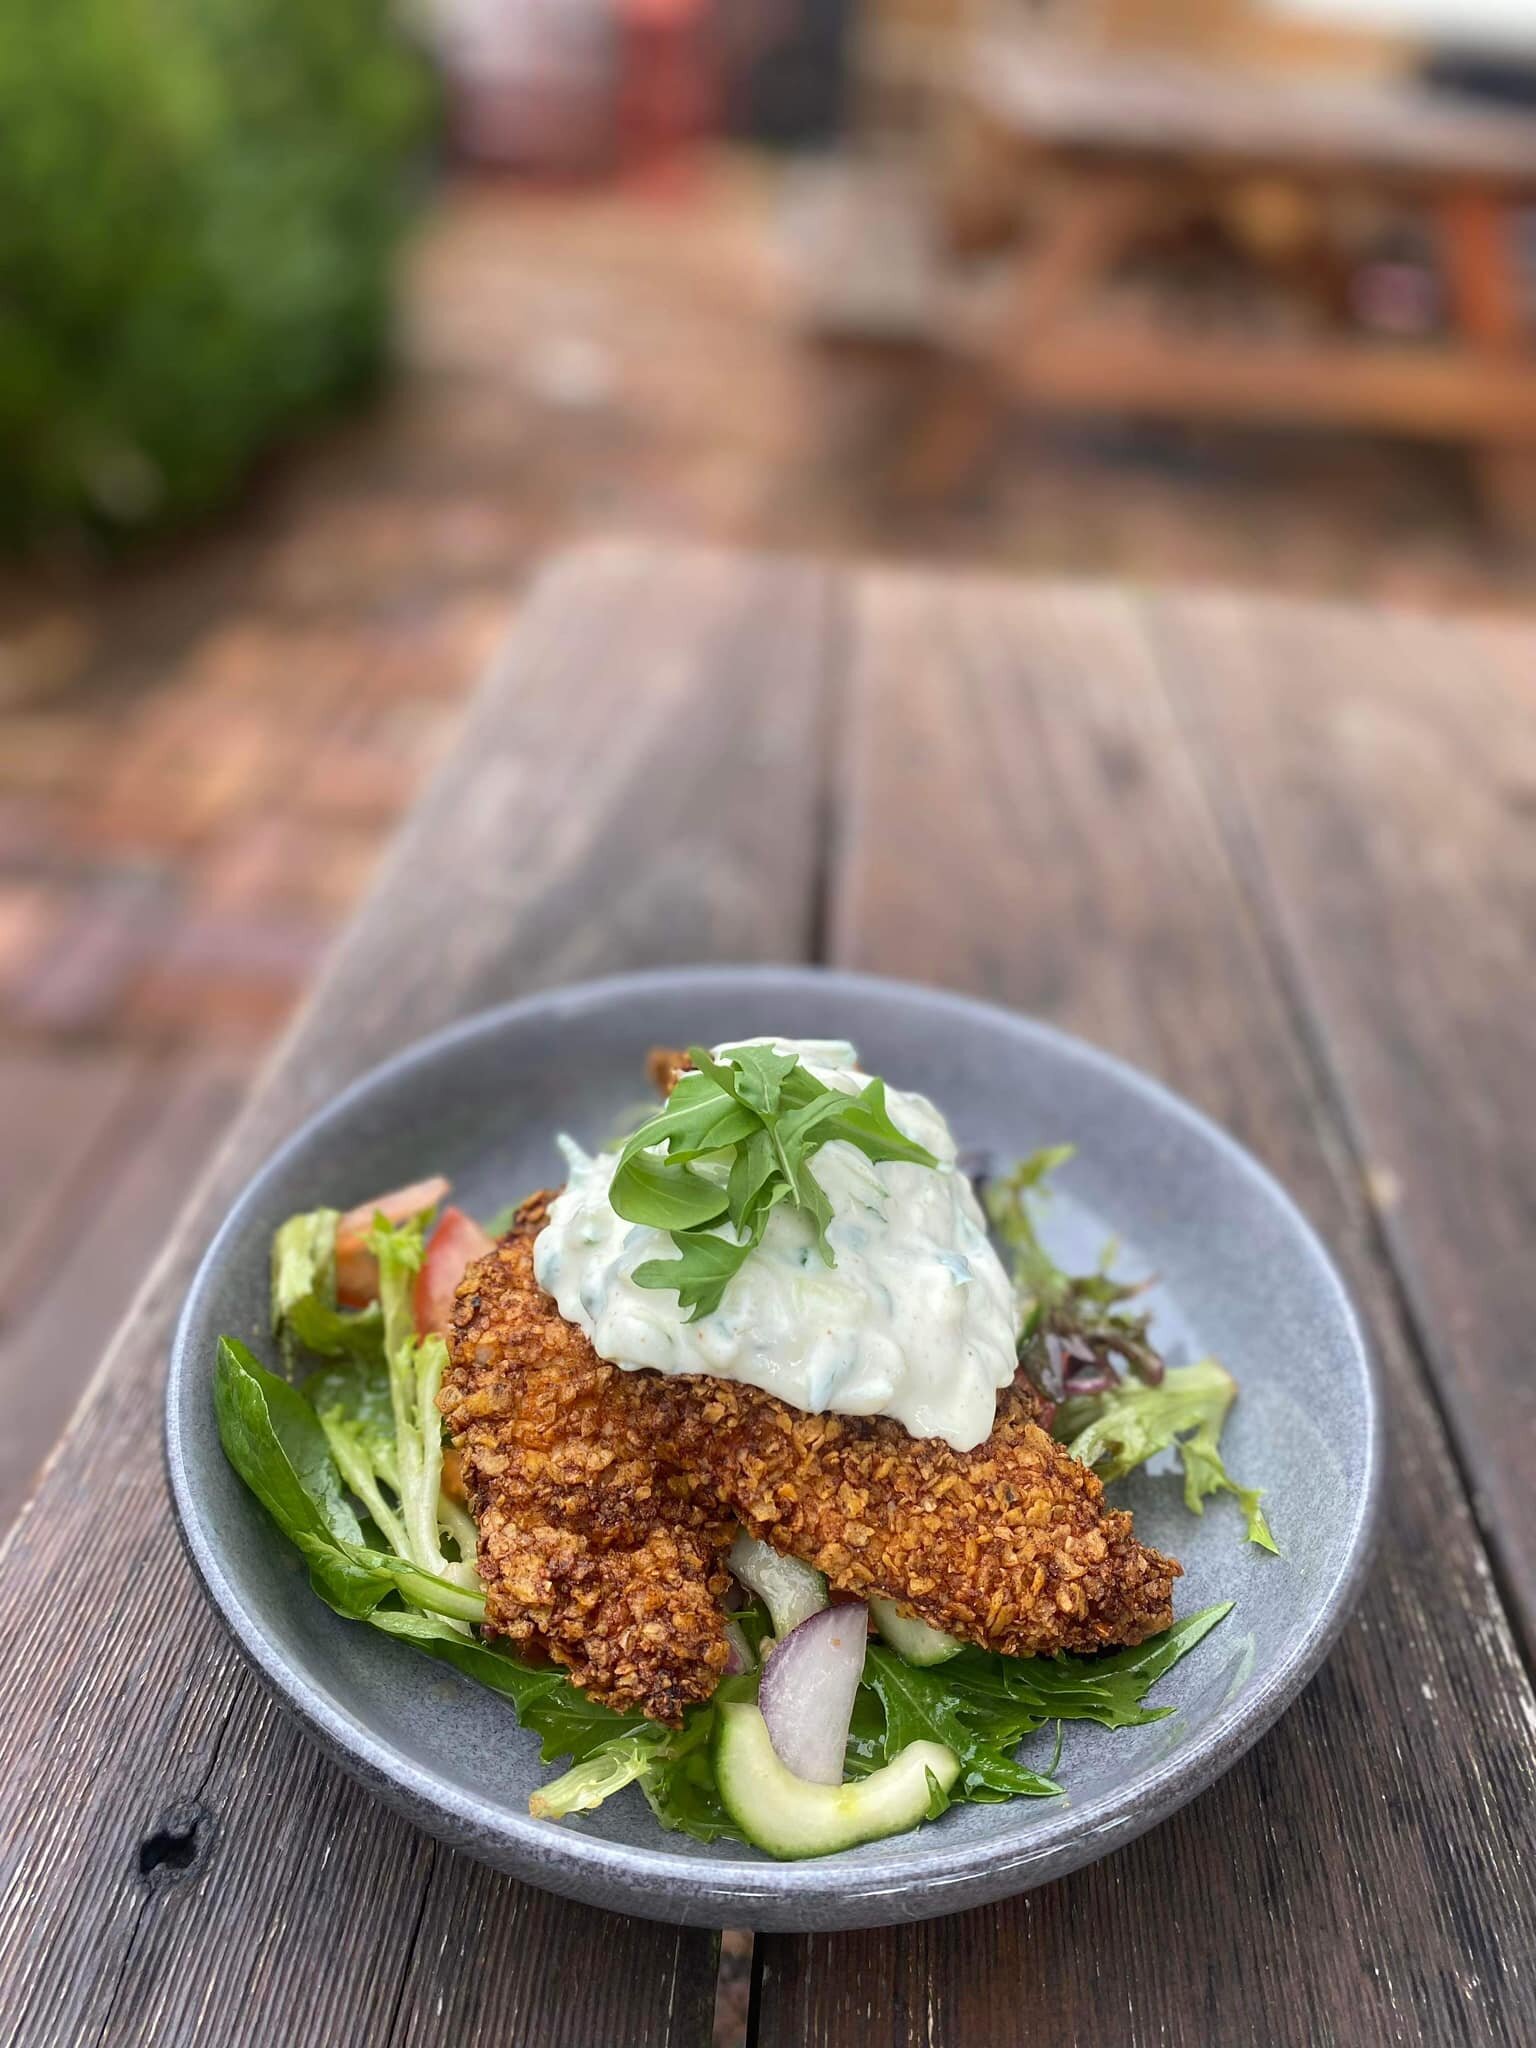 Dorito crumbed chicken is on our lunch and entre menu! 🍴

All new dishes launching over the next week! 

Watch each day for a new dish! 🤤